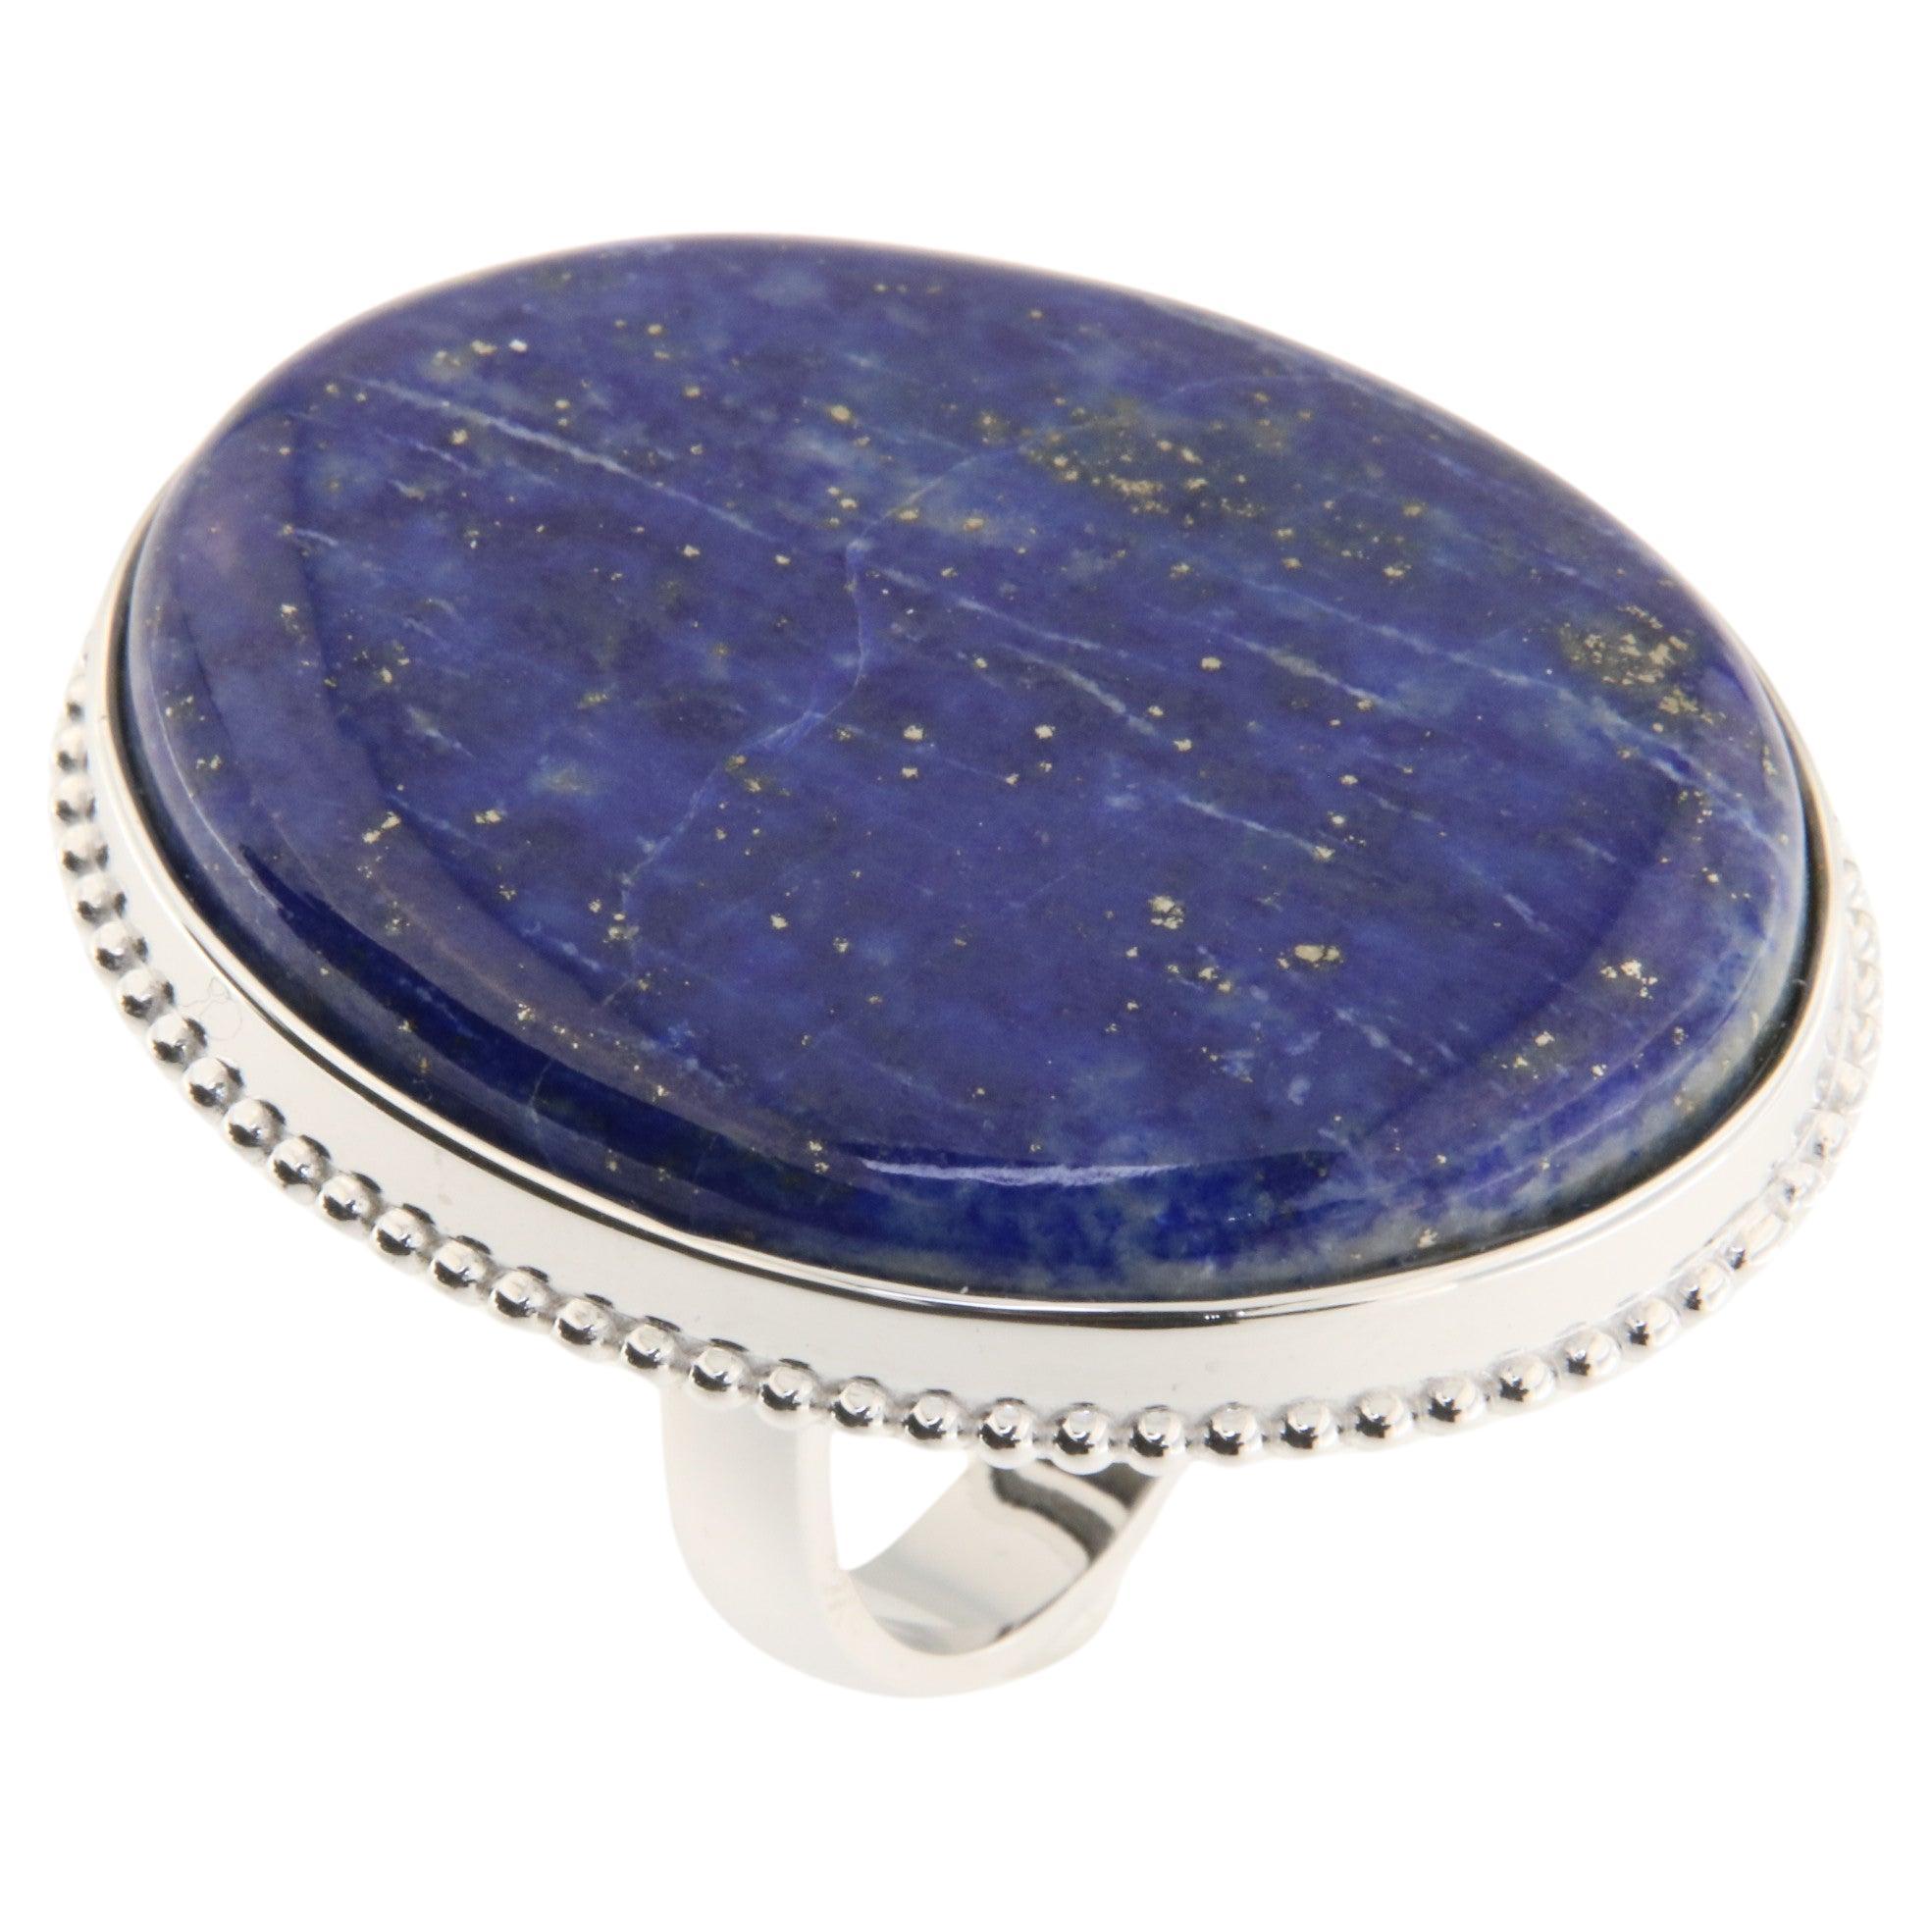 Orloff of Denmark, Beautiful 73 carat Lapis Lazuli Ring in 925 Sterling Silver For Sale